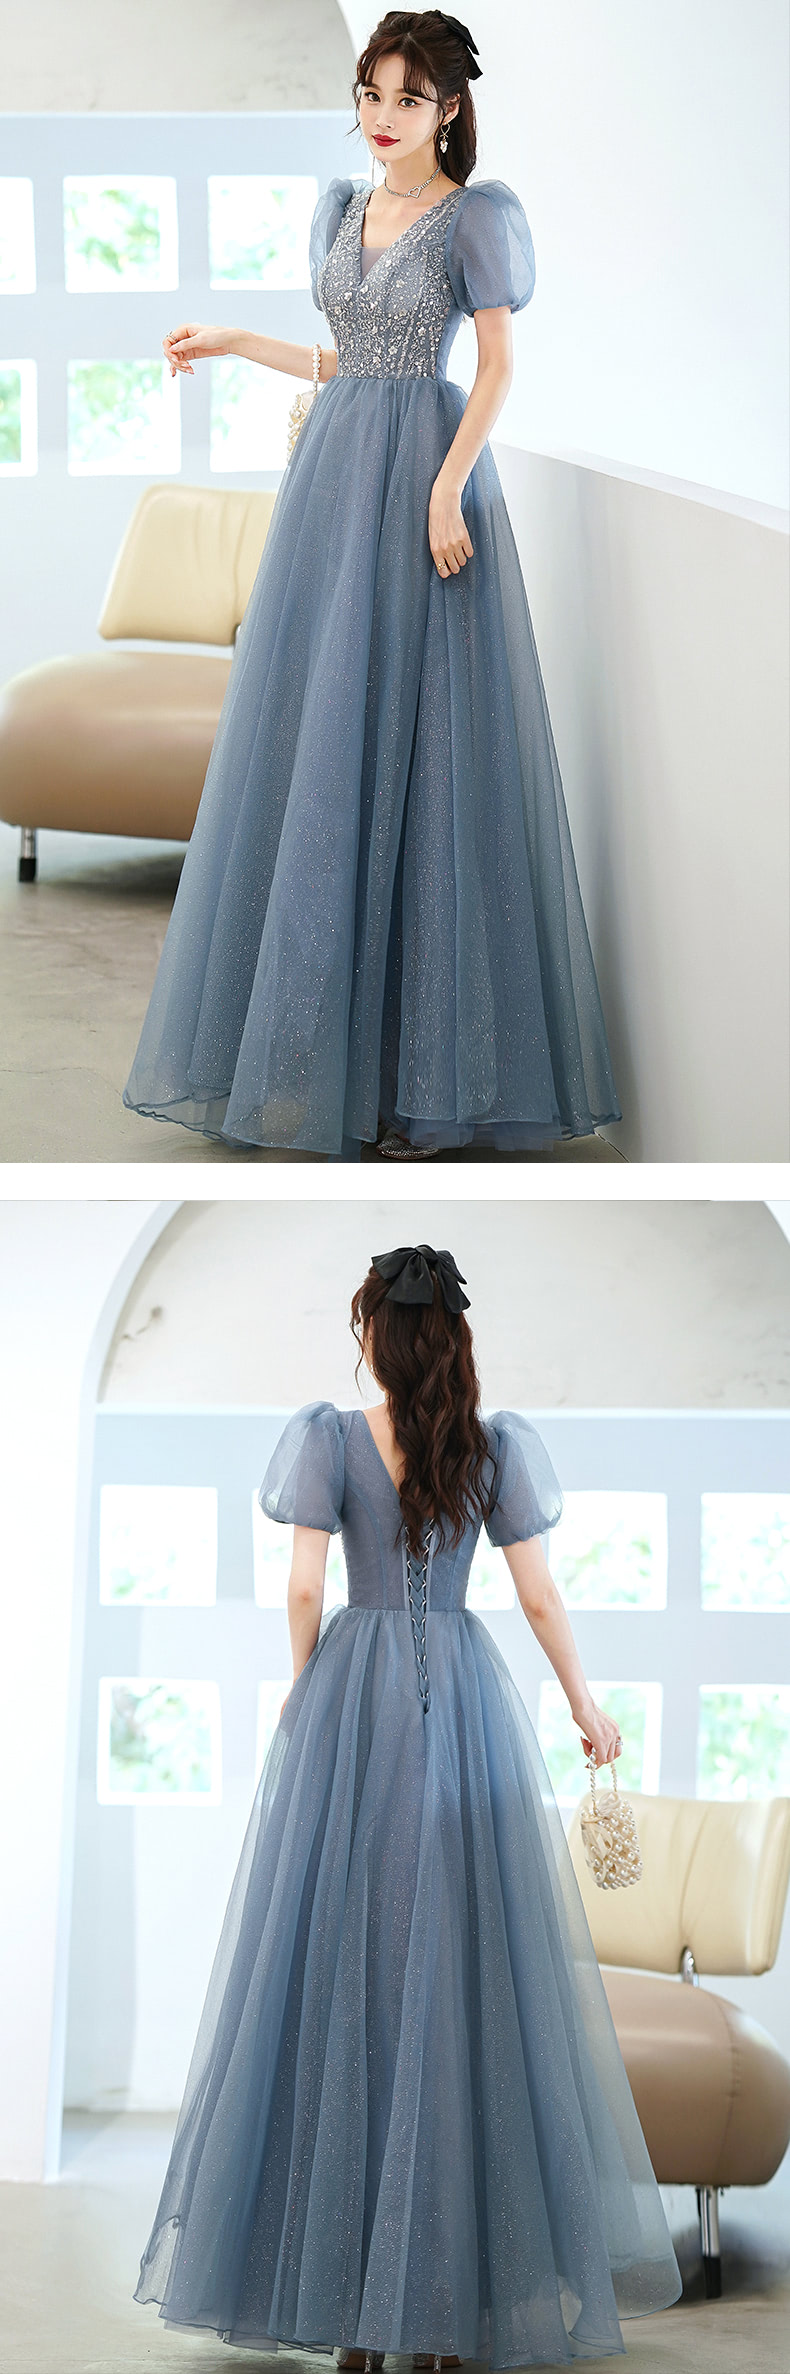 A-Line-Blue-Tulle-Short-Sleeve-Prom-Party-Formal-Evening-Dress17.jpg